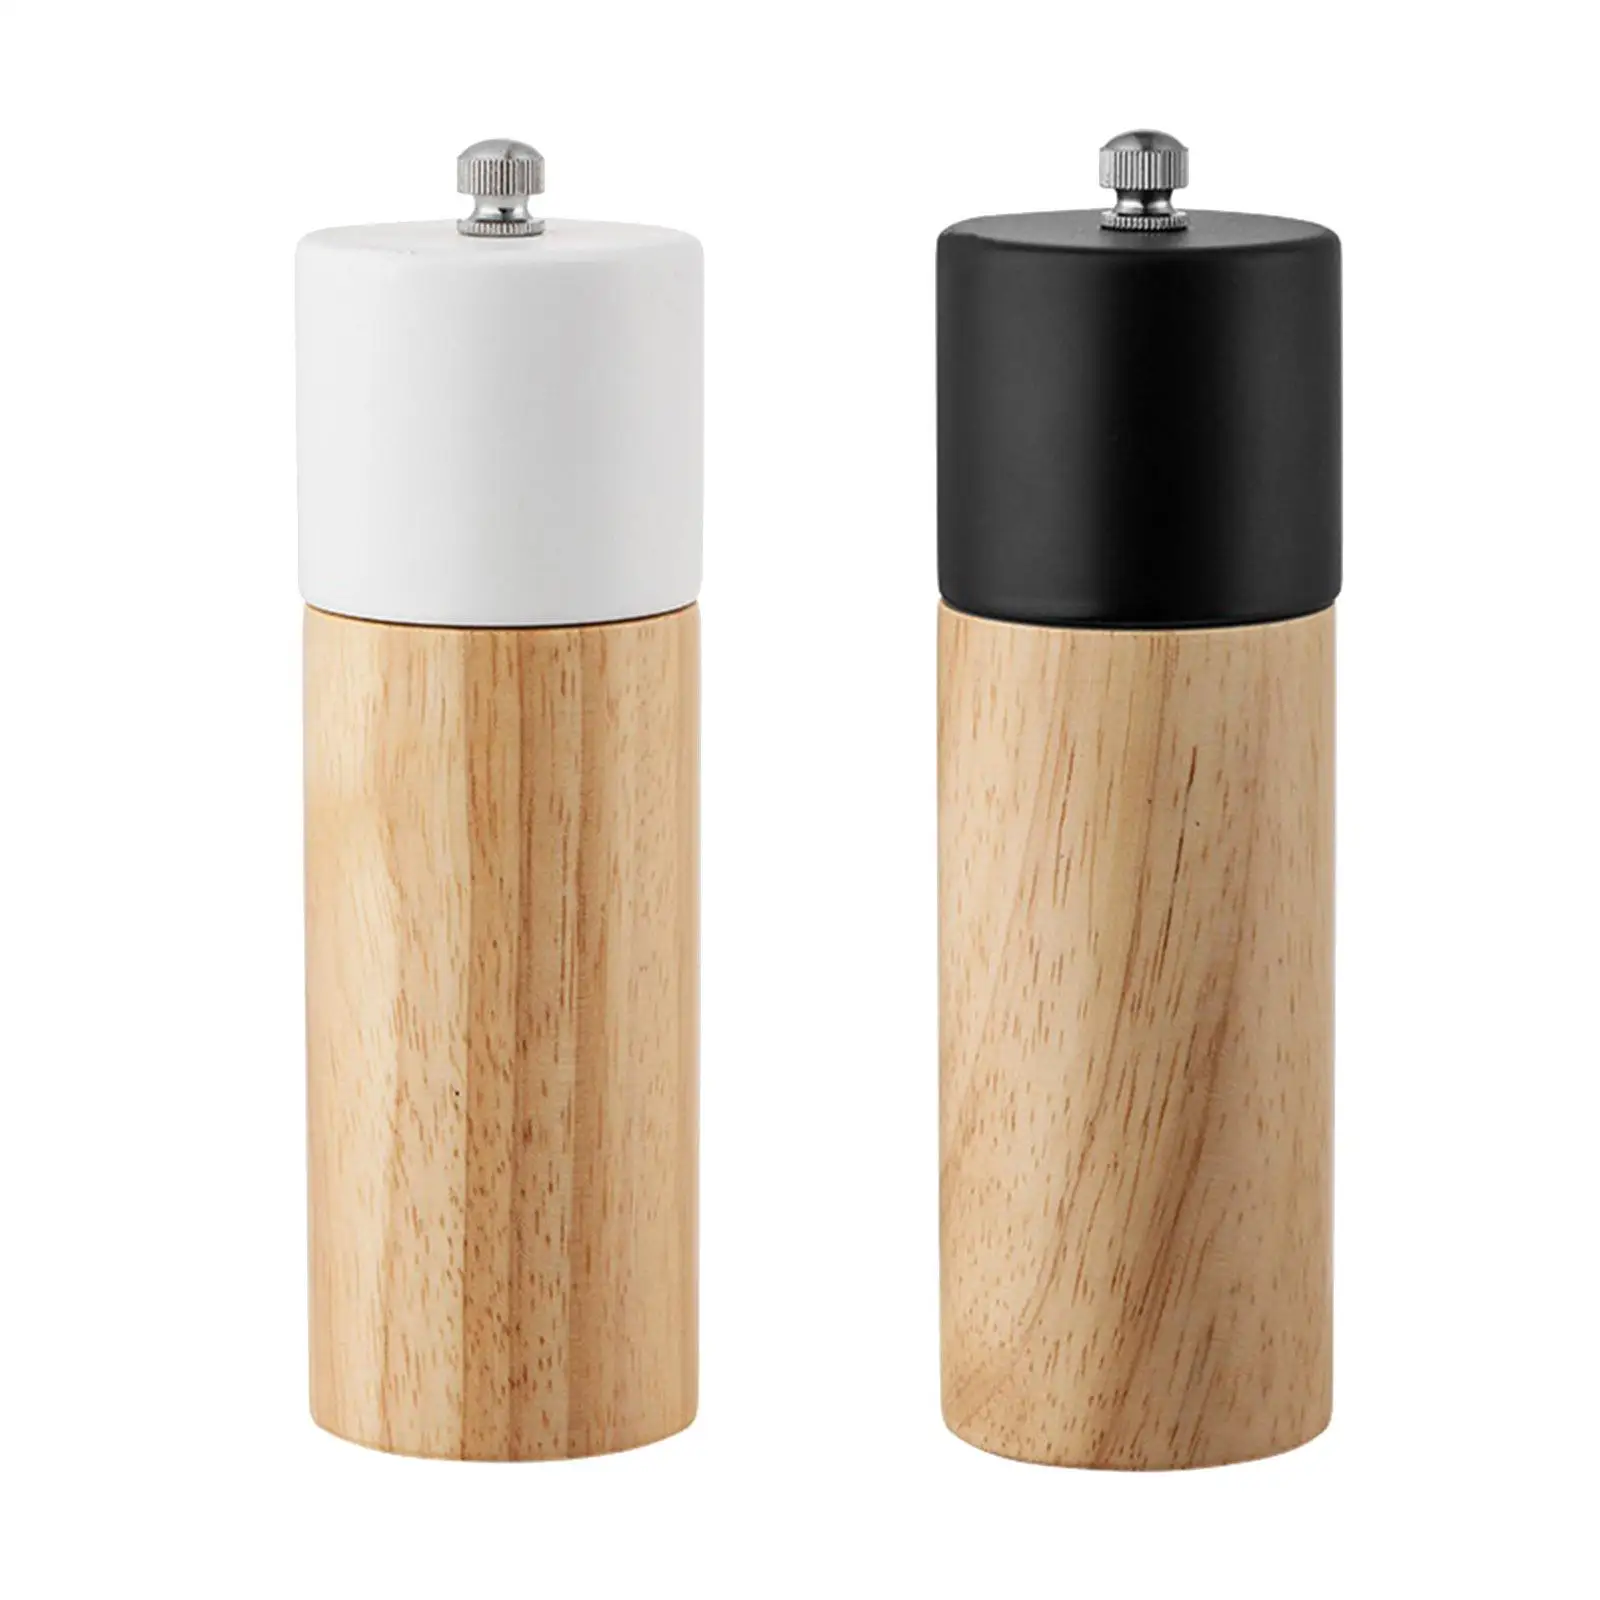 Manual Pepper and Salt Mill 1x with Spice Easy Refillable Salt and Pepper for Kitchen Gadgets Home Picnics BBQ